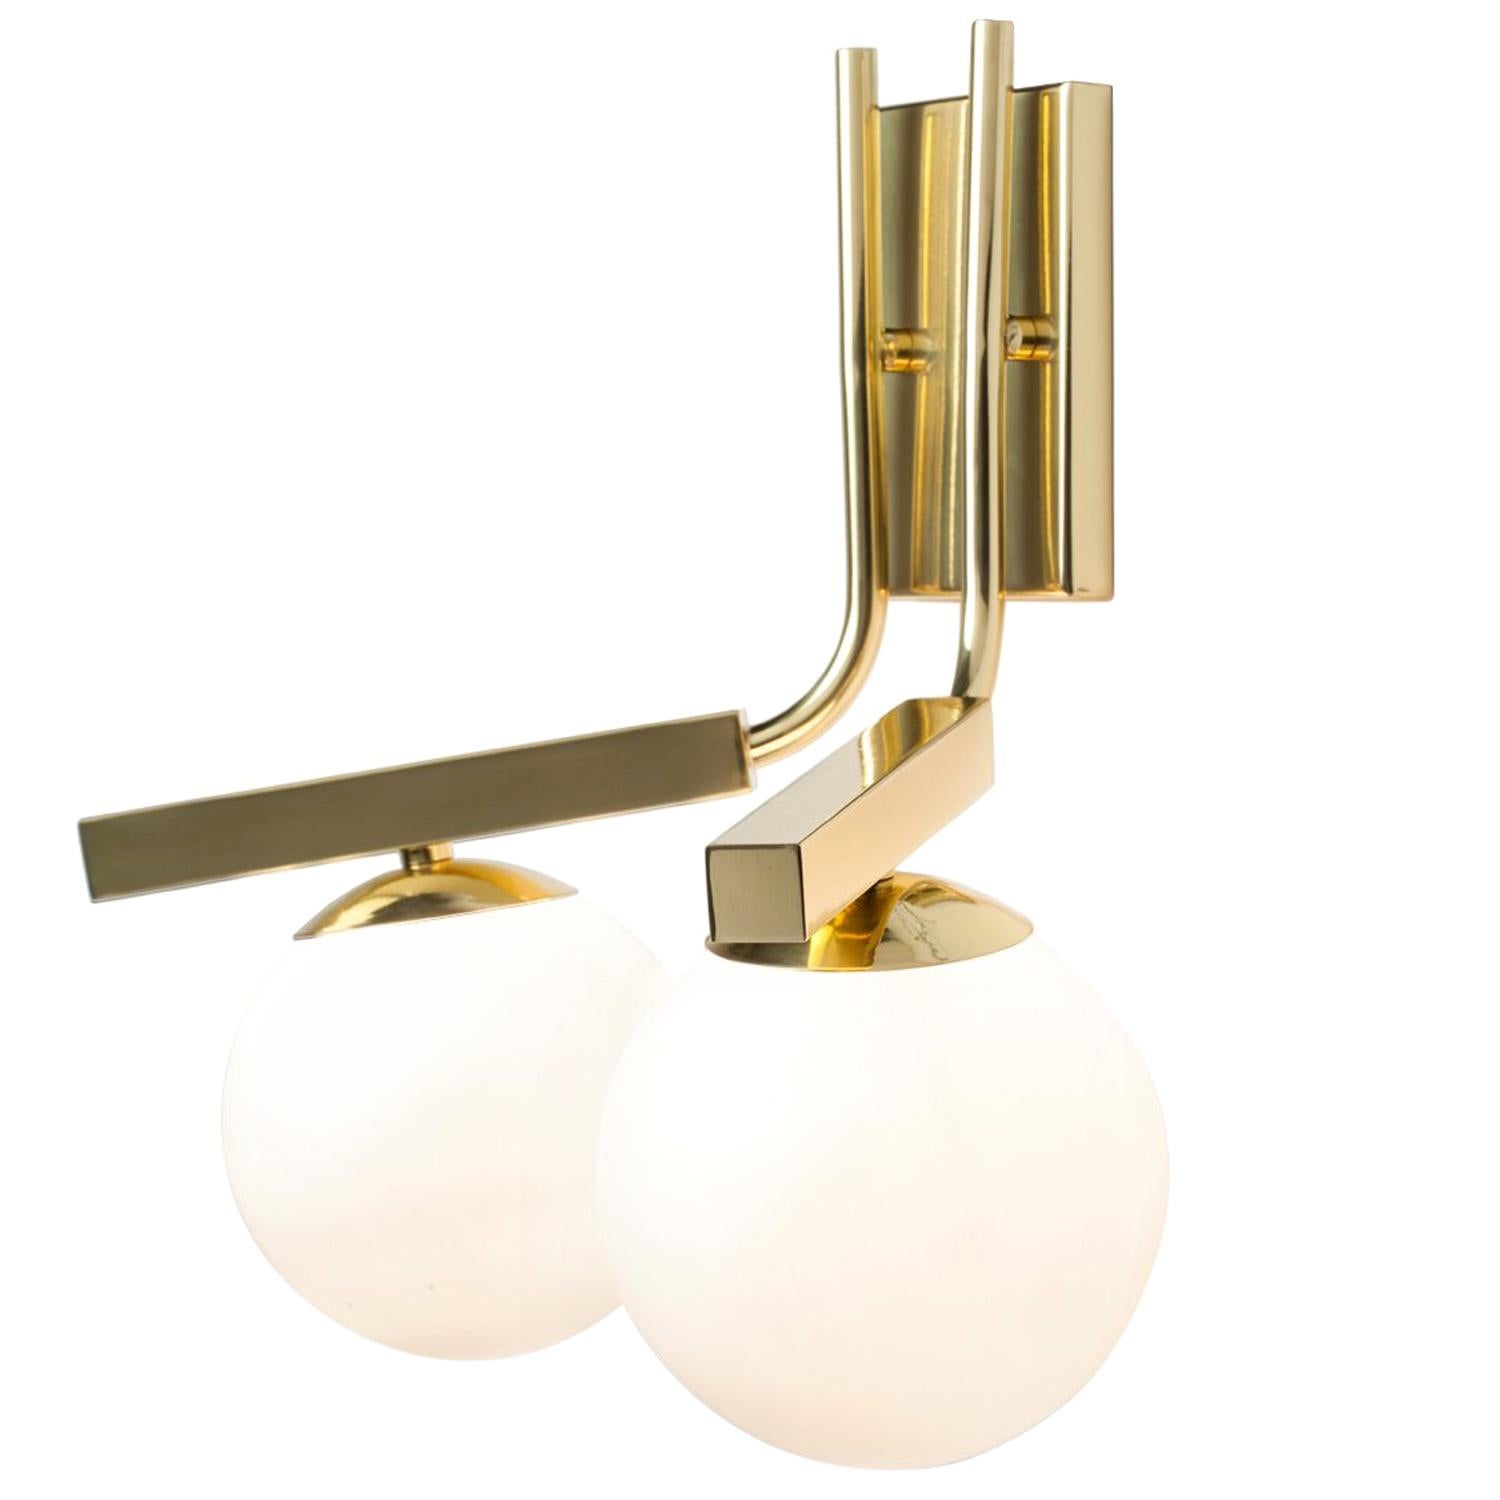 Art Deco inspired Globe Wall I Sconce in Brass